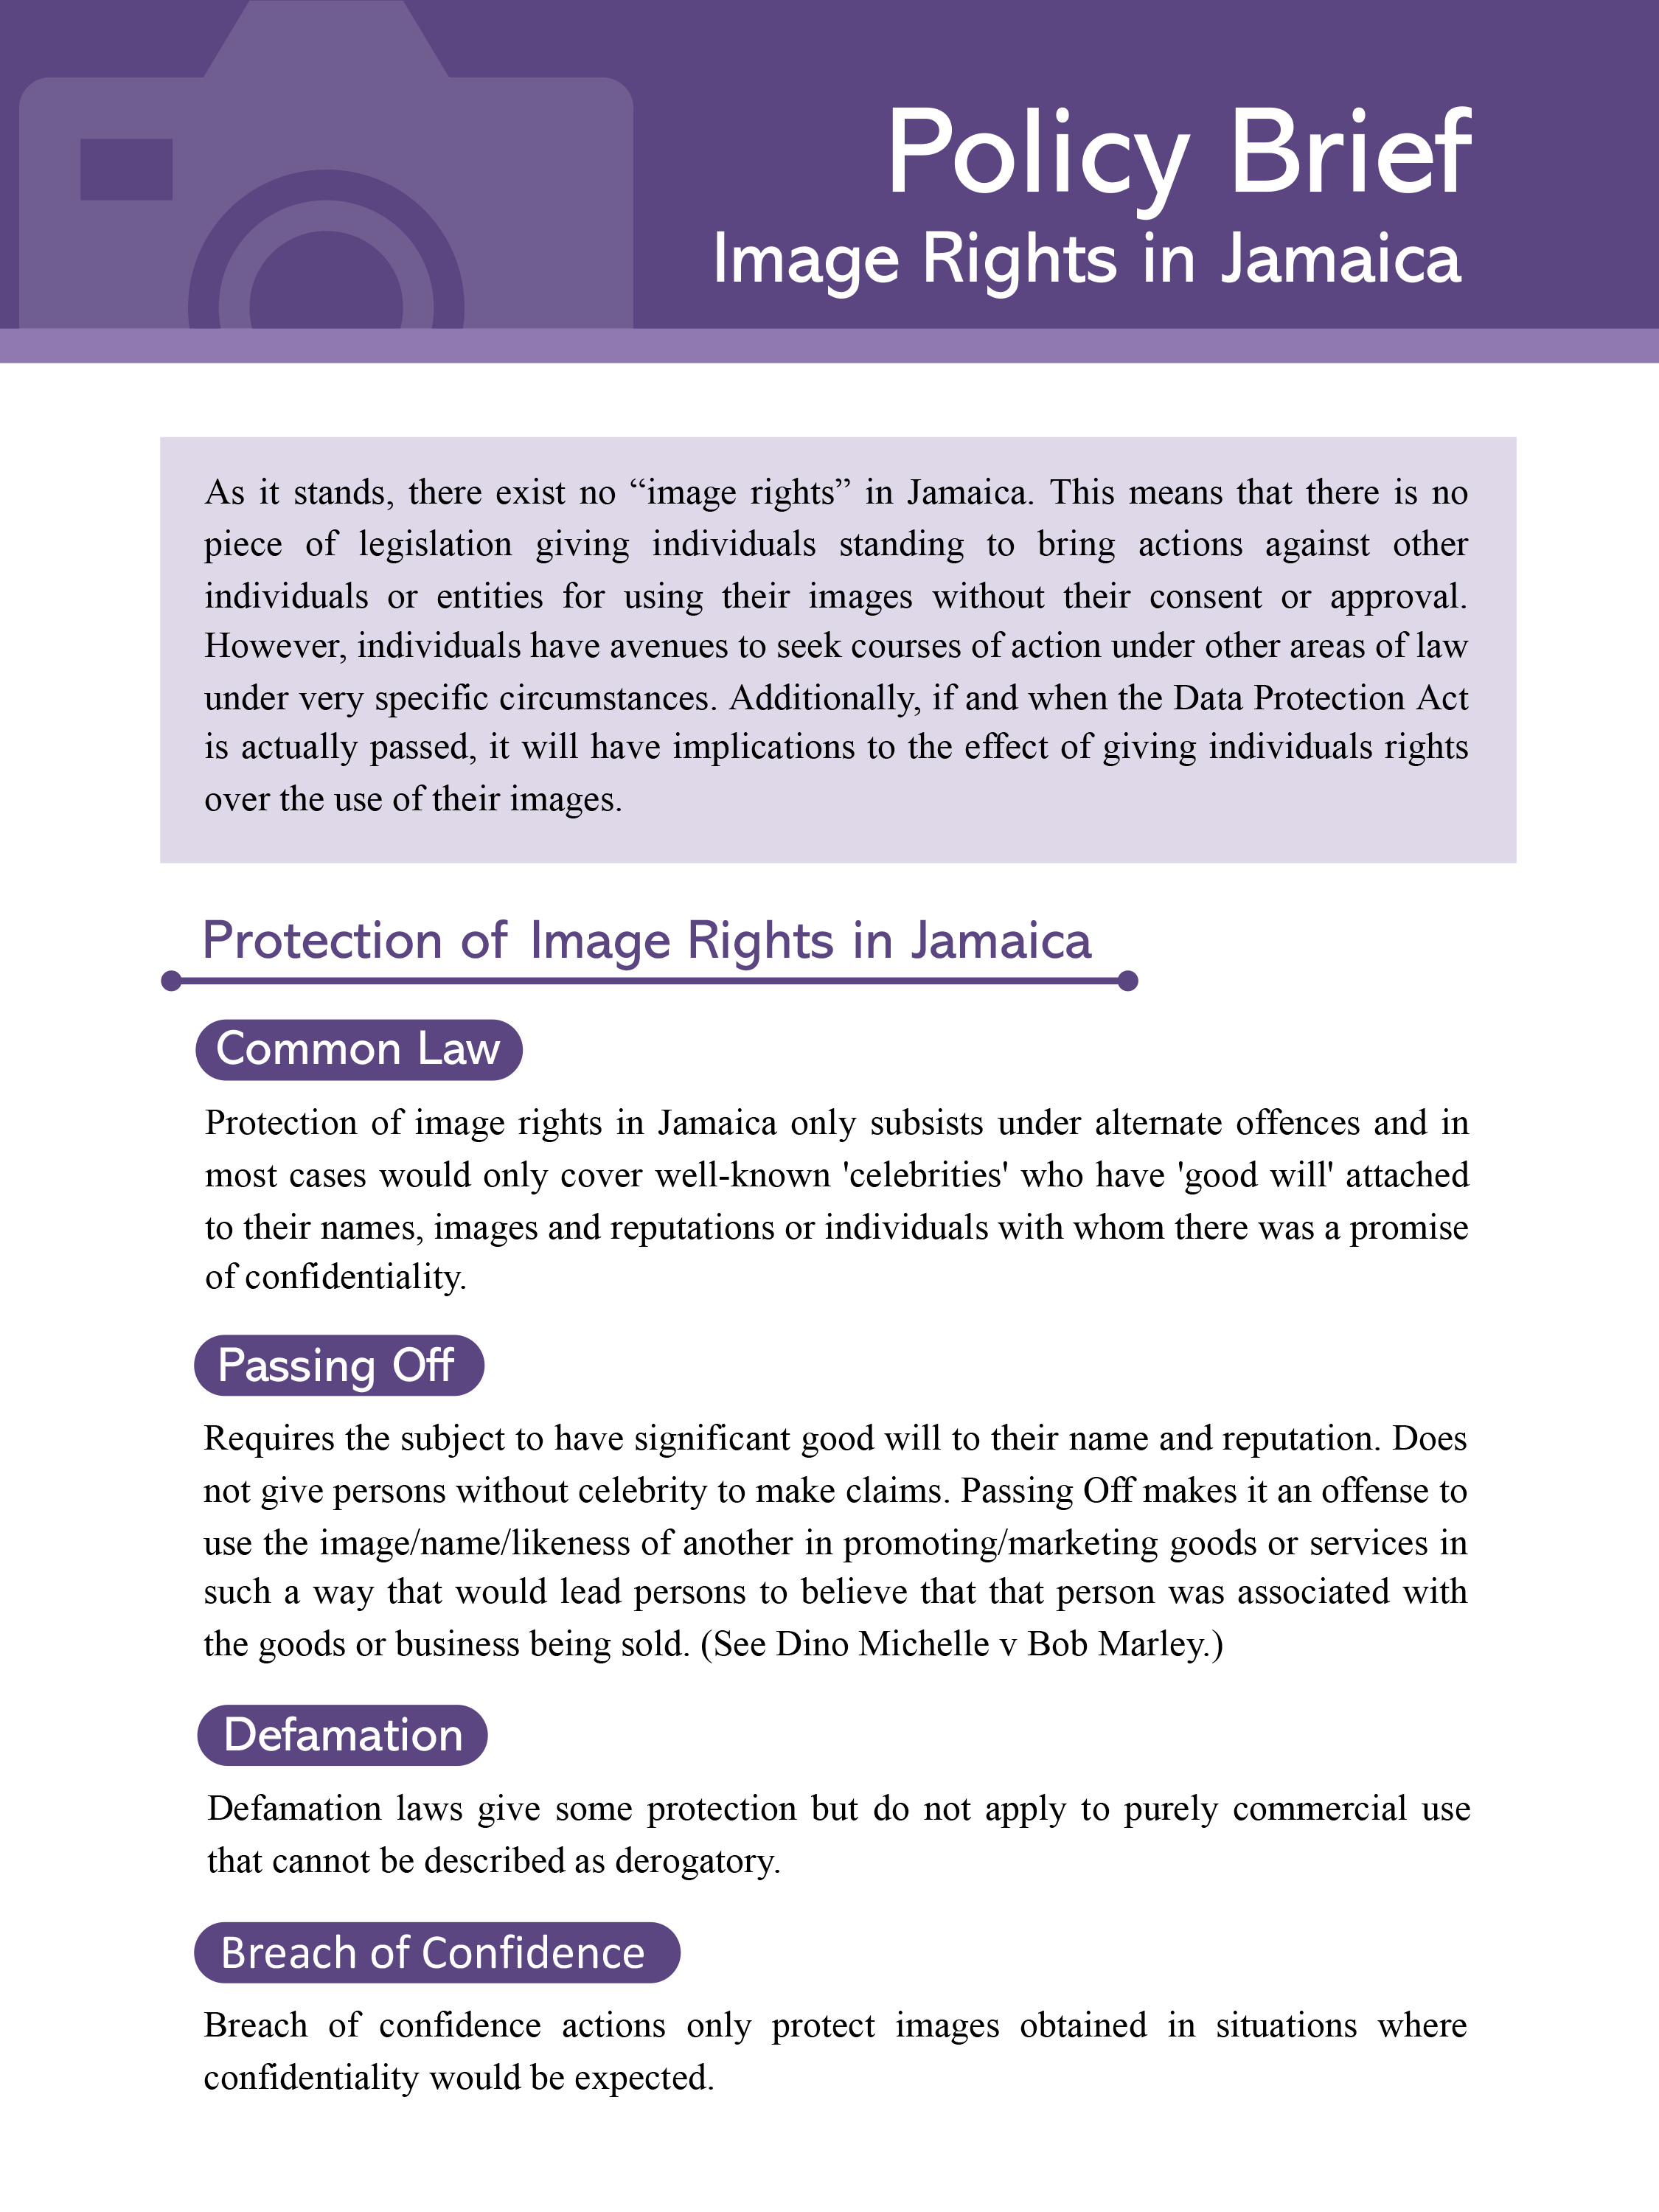 Image Rights in Jamaica